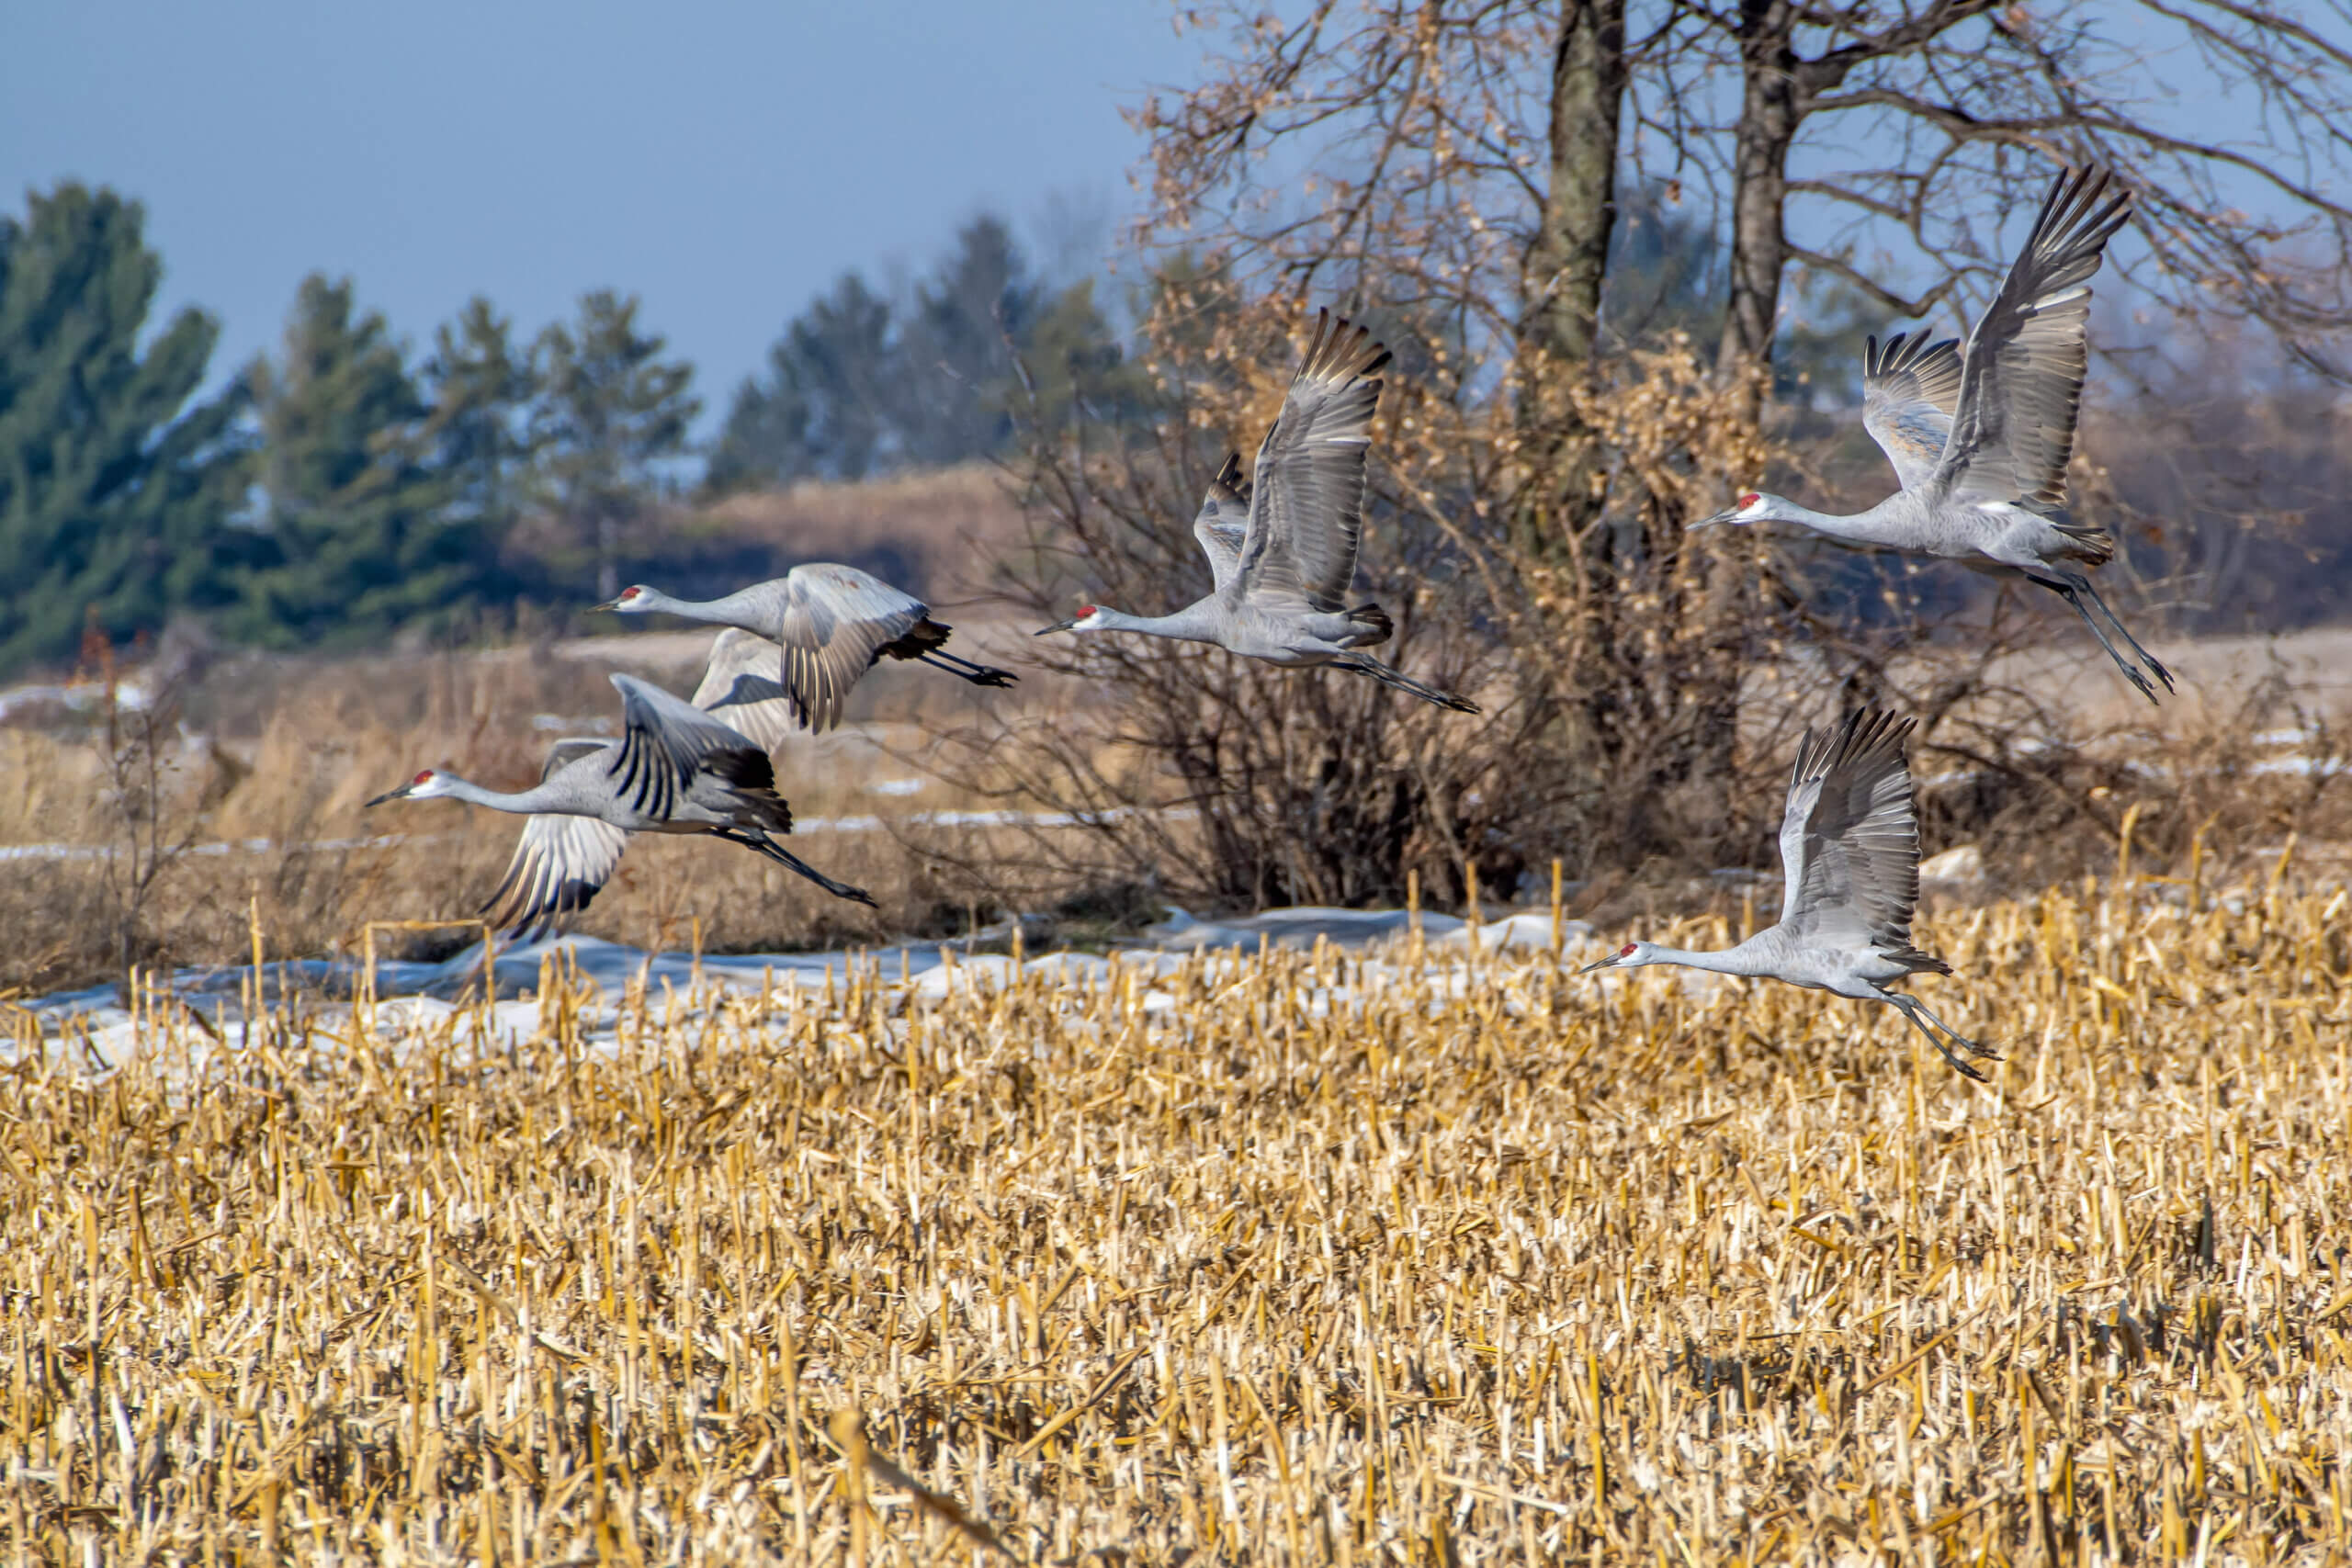 Knowles-Nelson Stewardship Program - several cranes flying over a snowy cornfield with a backdrop of pine trees